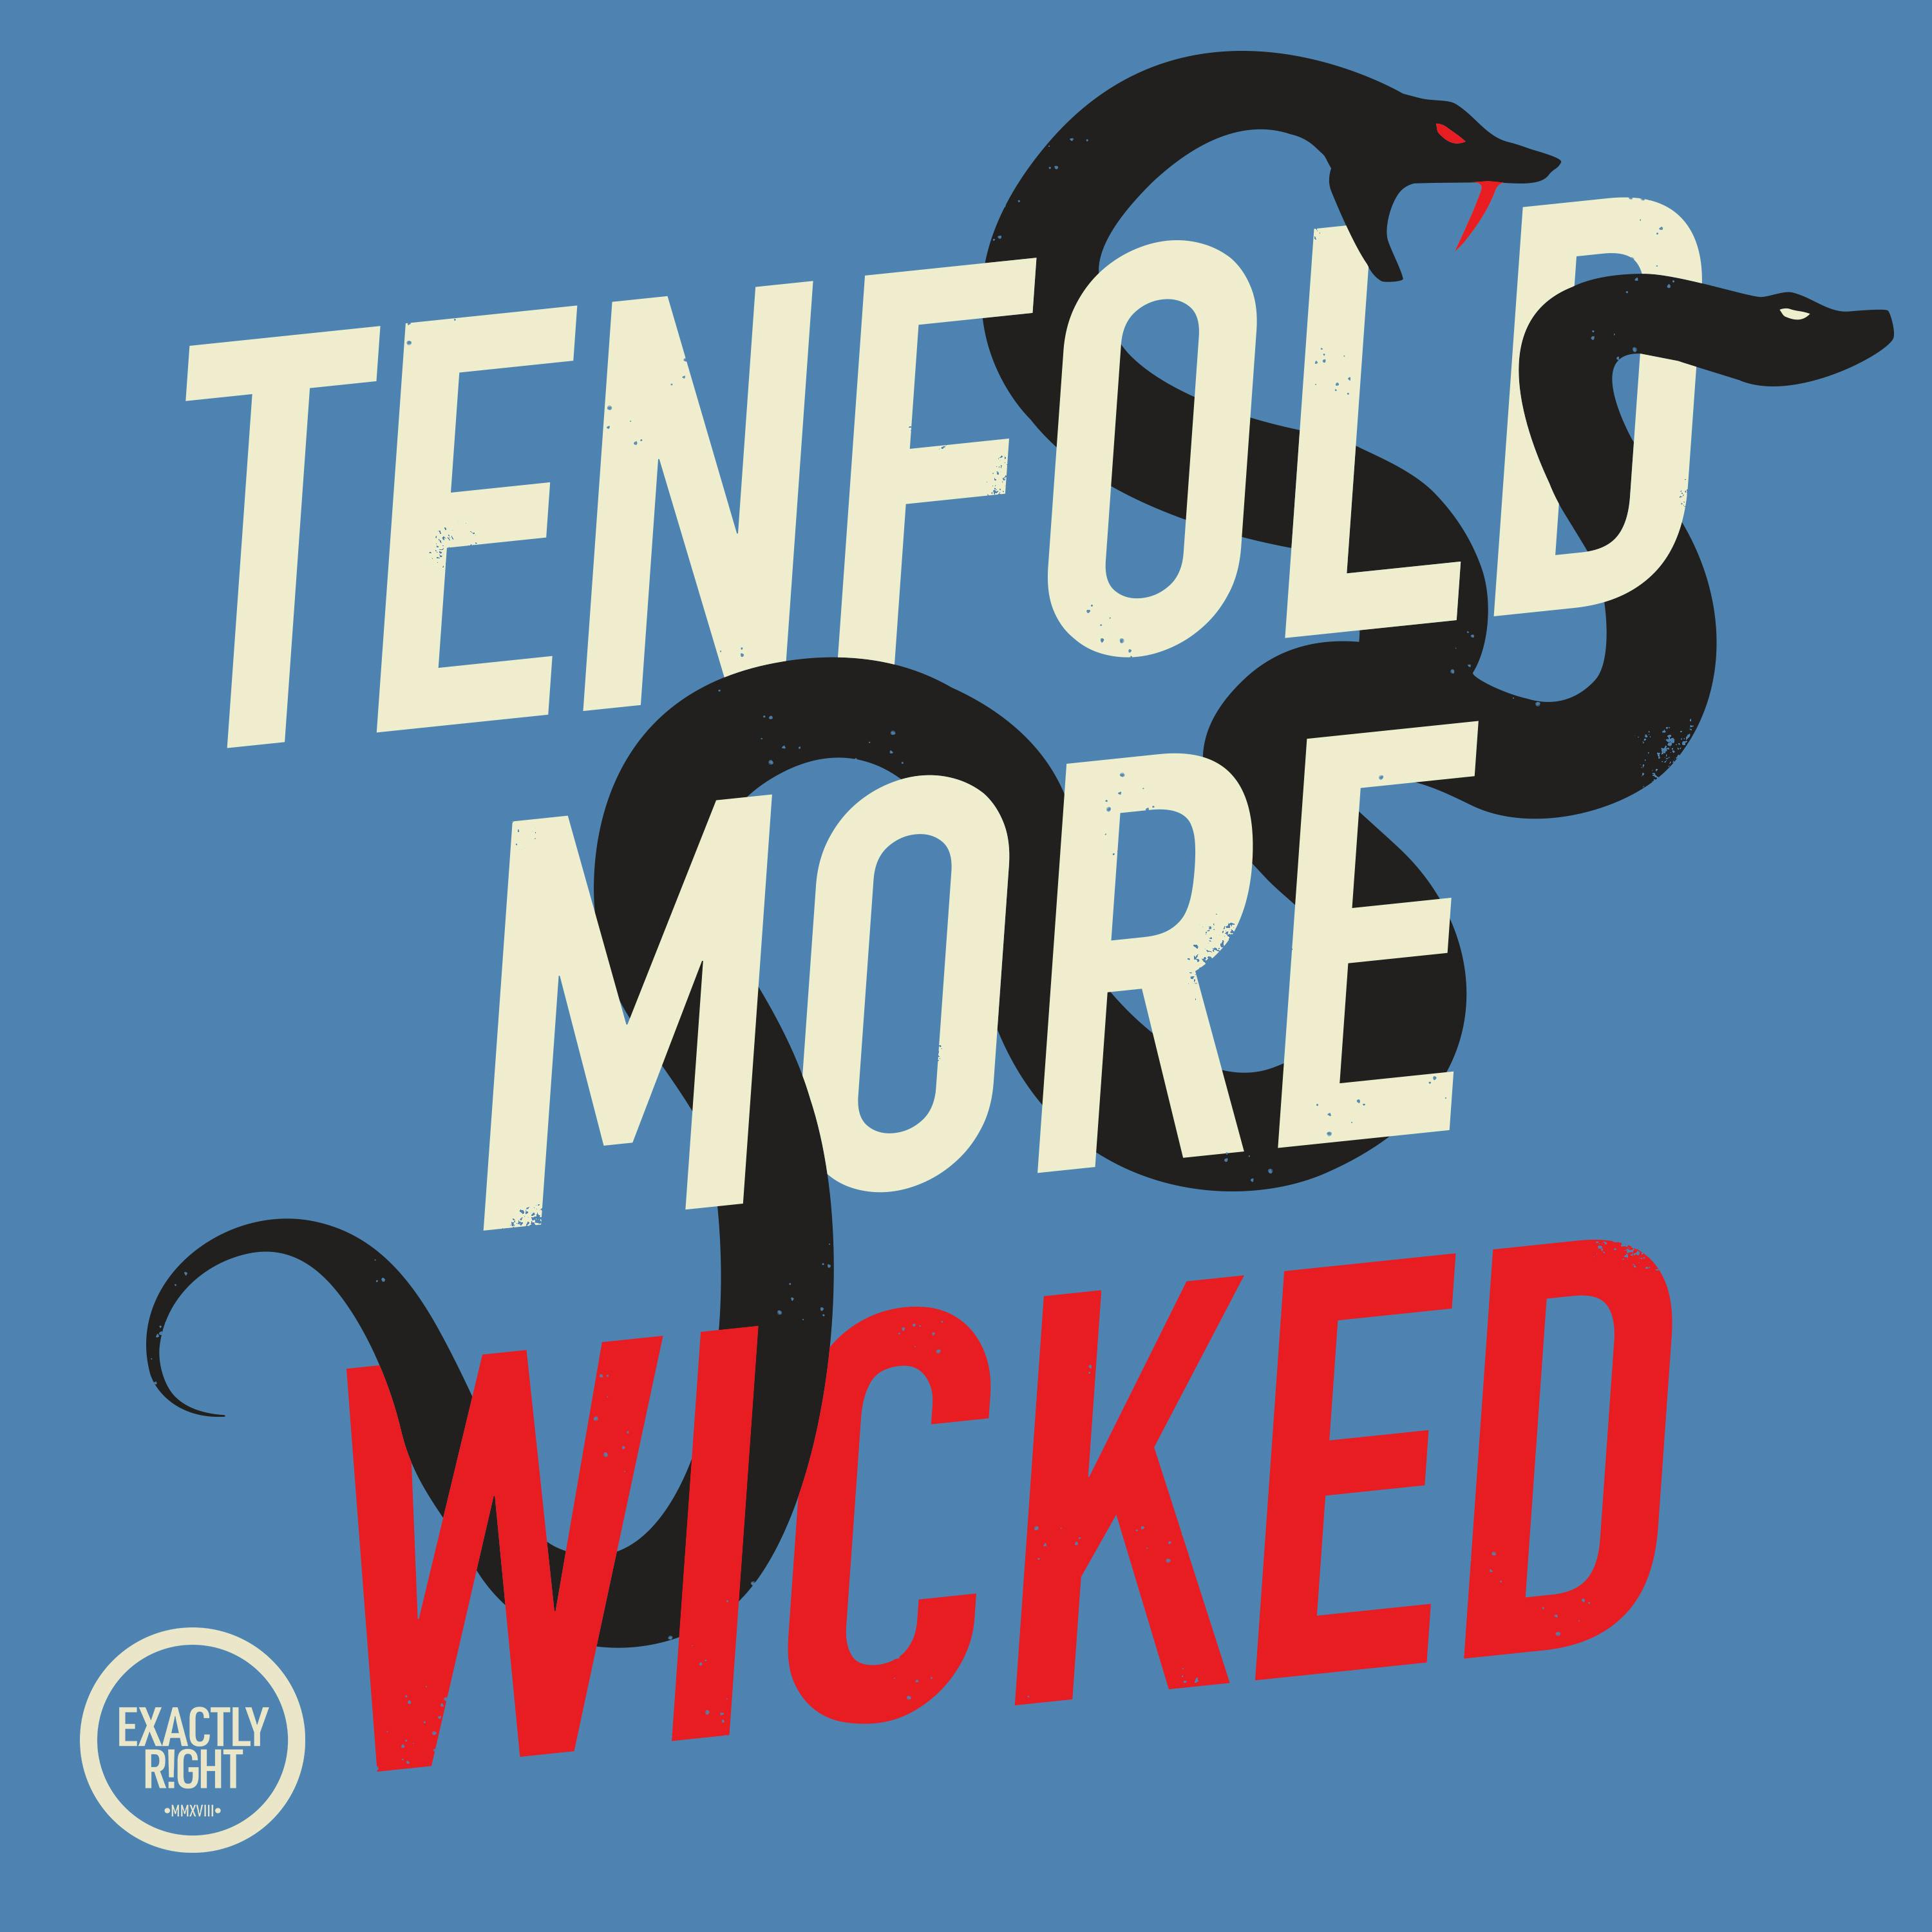 Tenfold More Wicked - A Blessing and a Curse: Panic